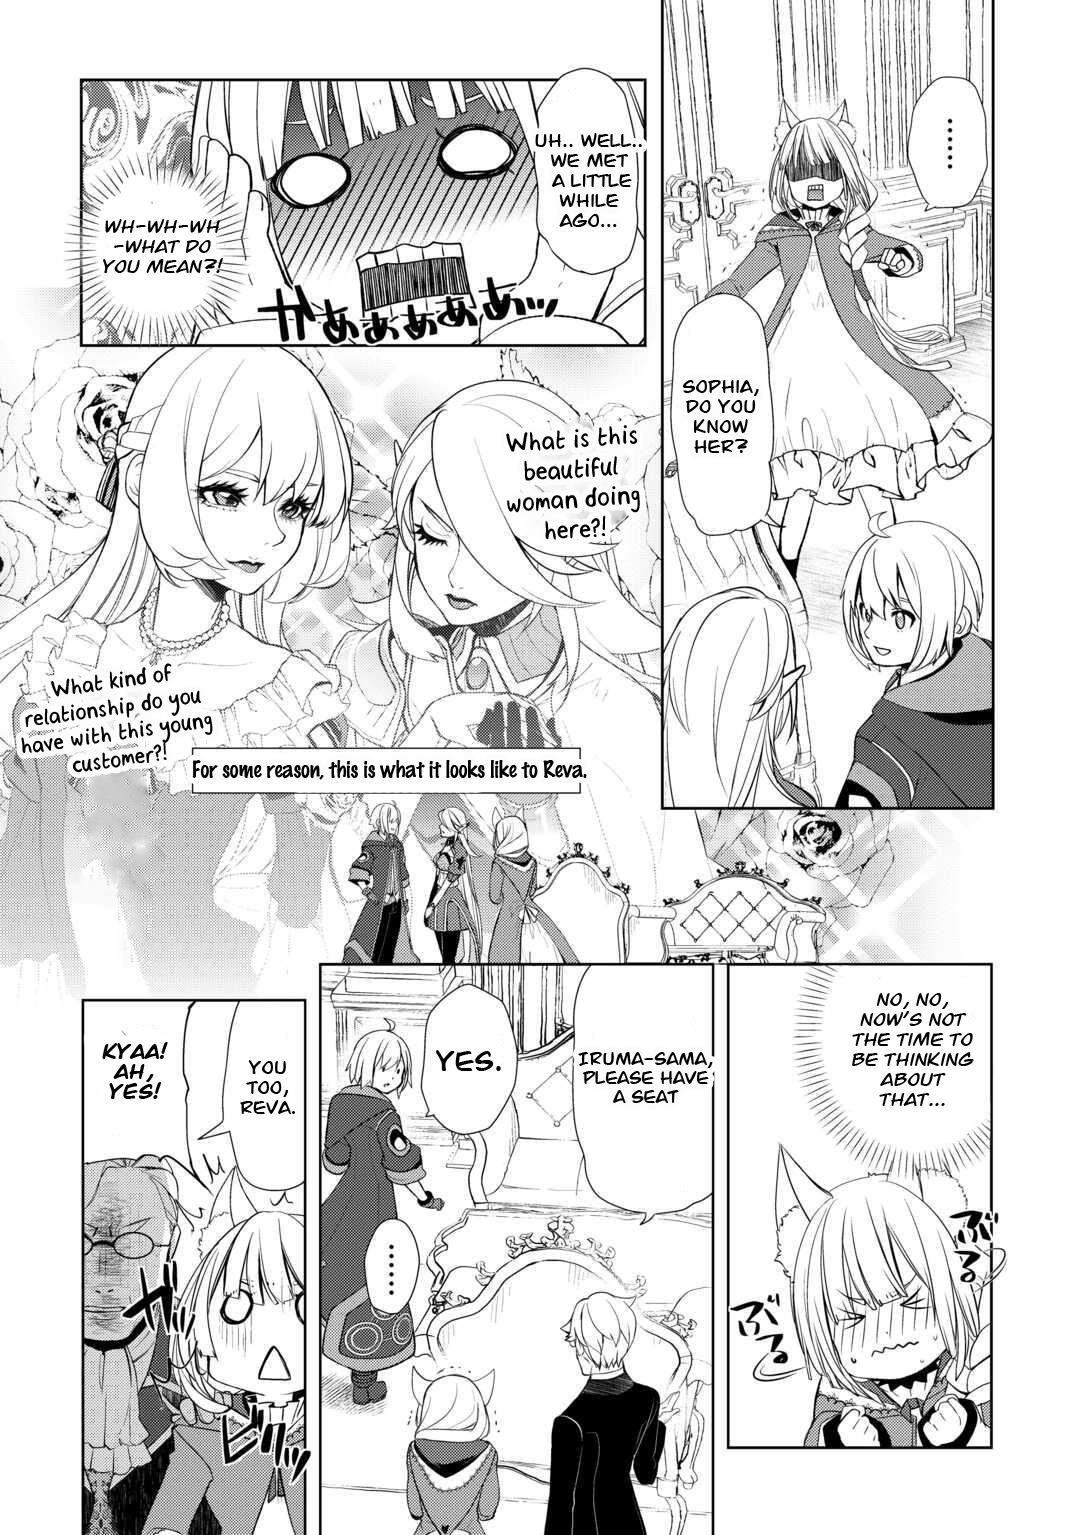 Someday Will I Be The Greatest Alchemist? - Page 2